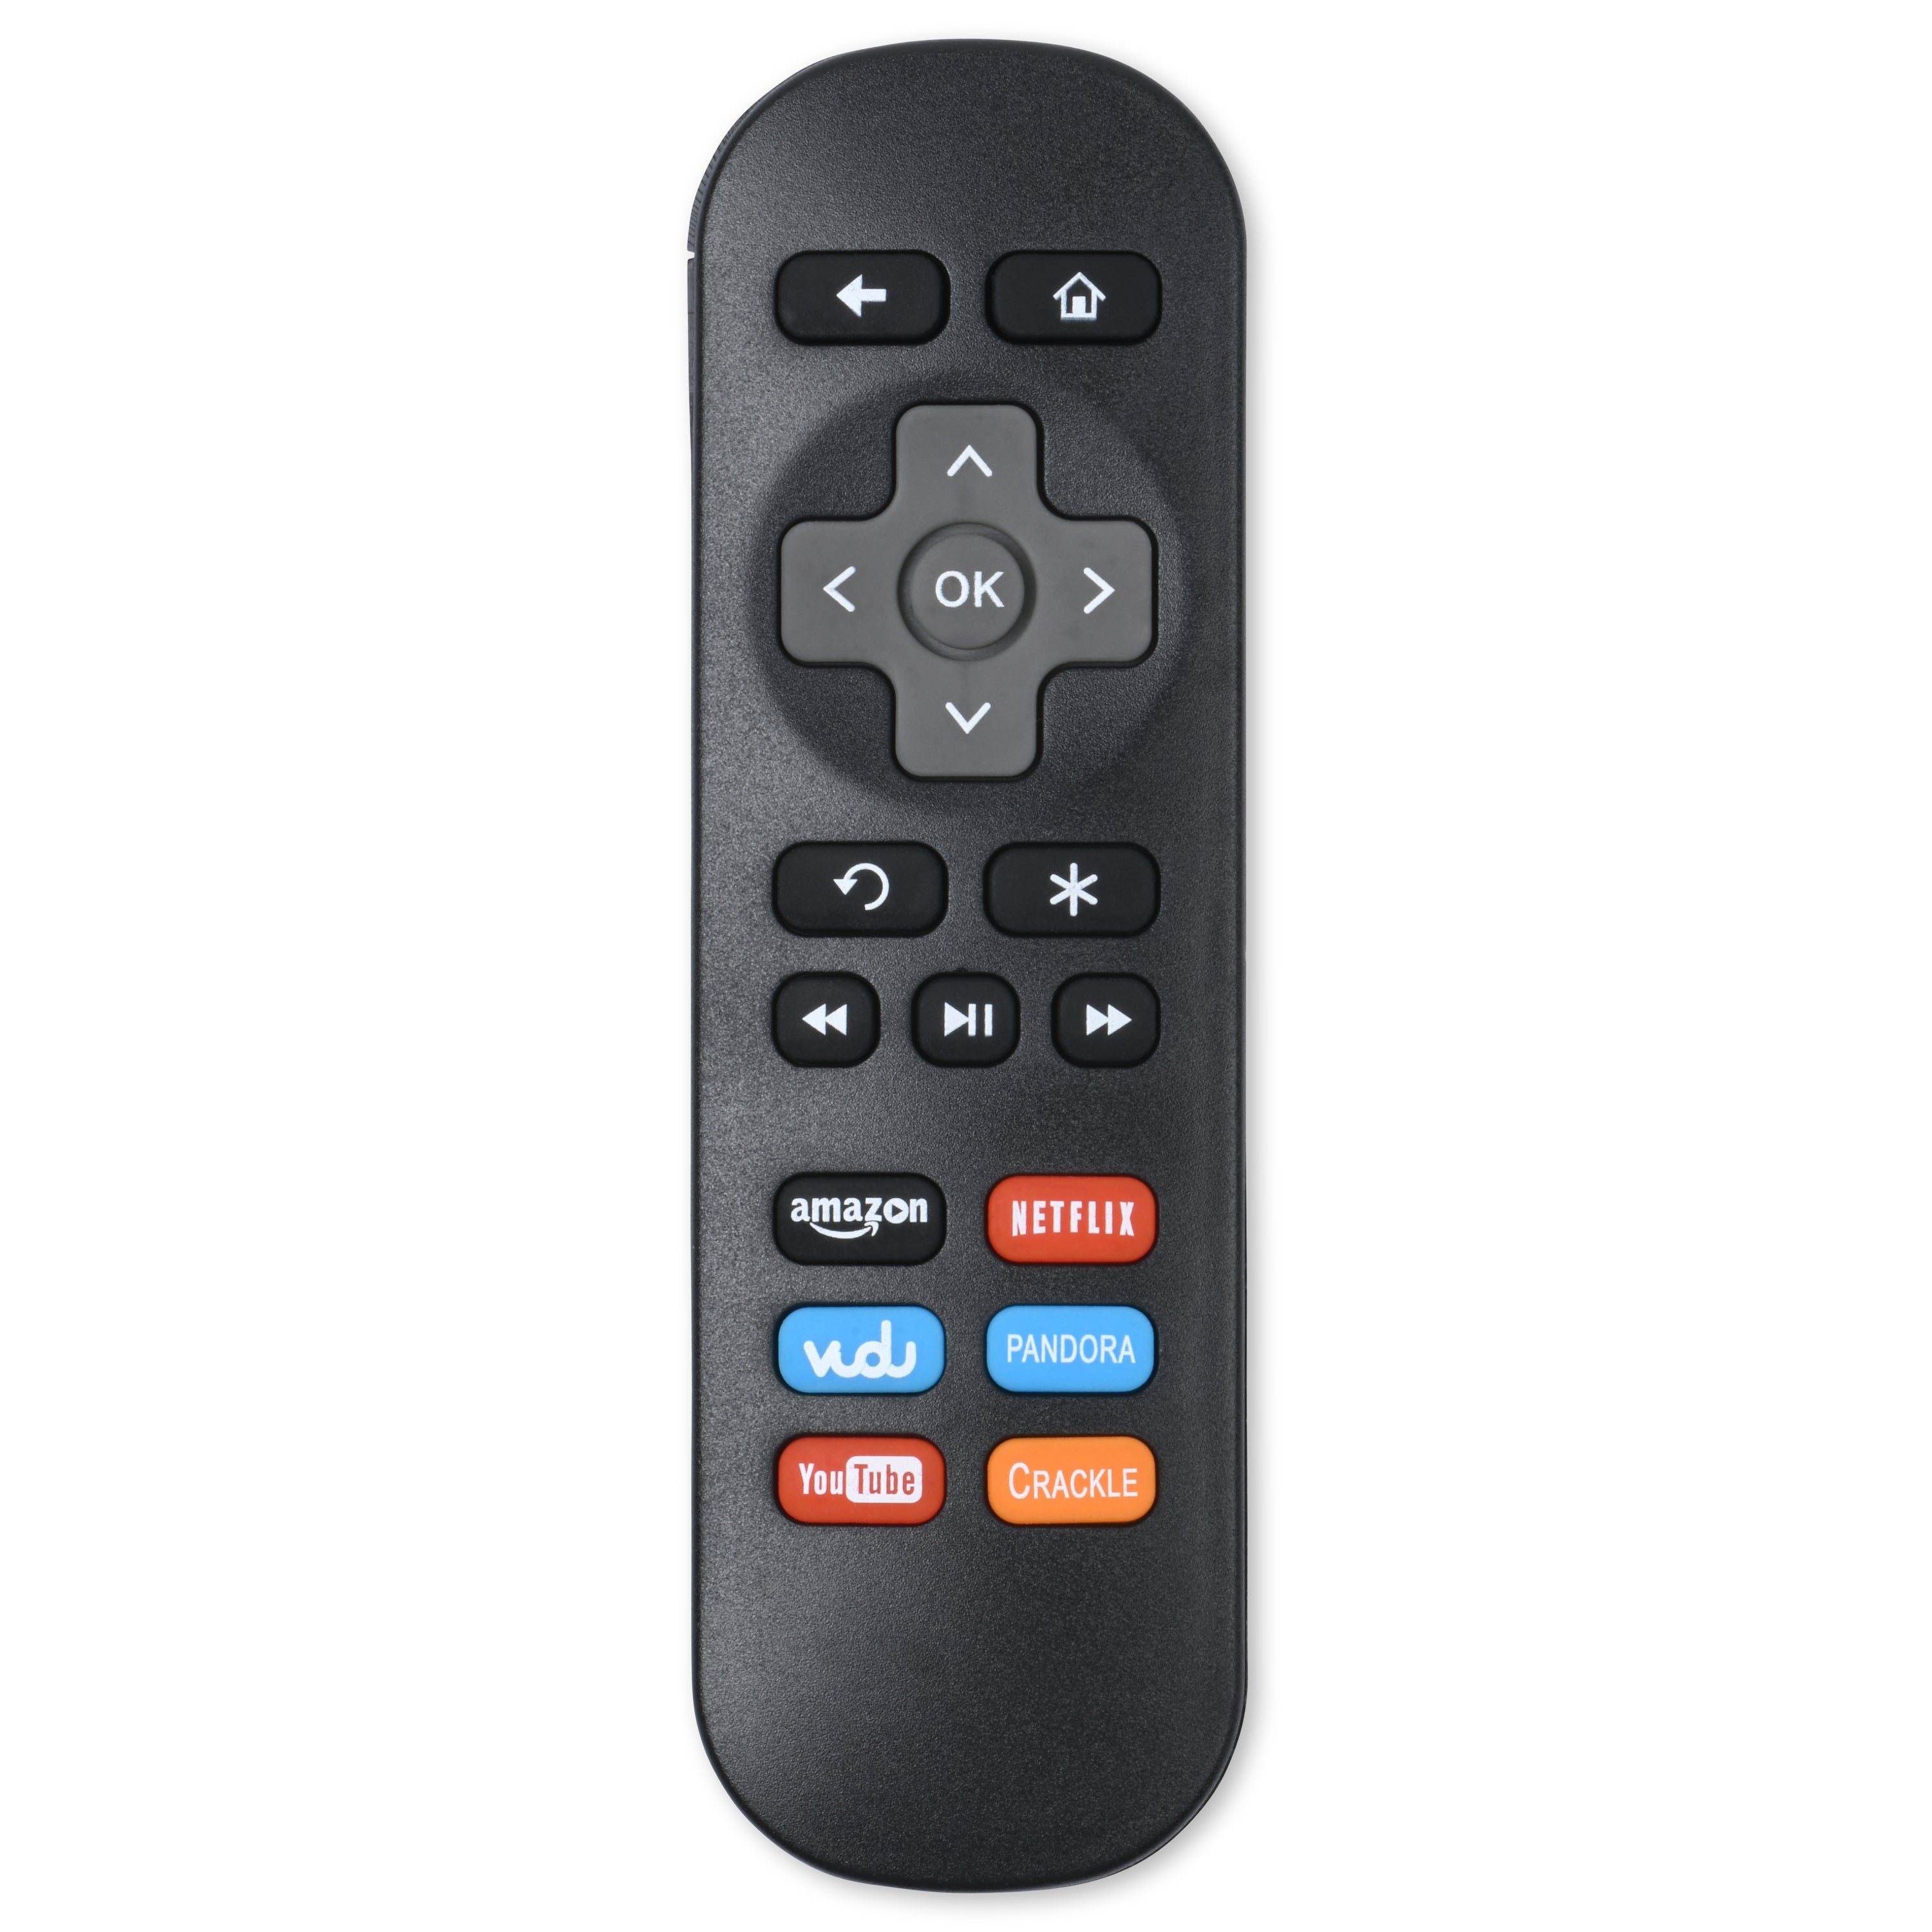 (NOT FOR ROKU TCL TV!) Replacement Remote Control 1 for ROKU 1 2 3 4 LT HD XD XS XDS with Instant Replay - Doug's Dojo